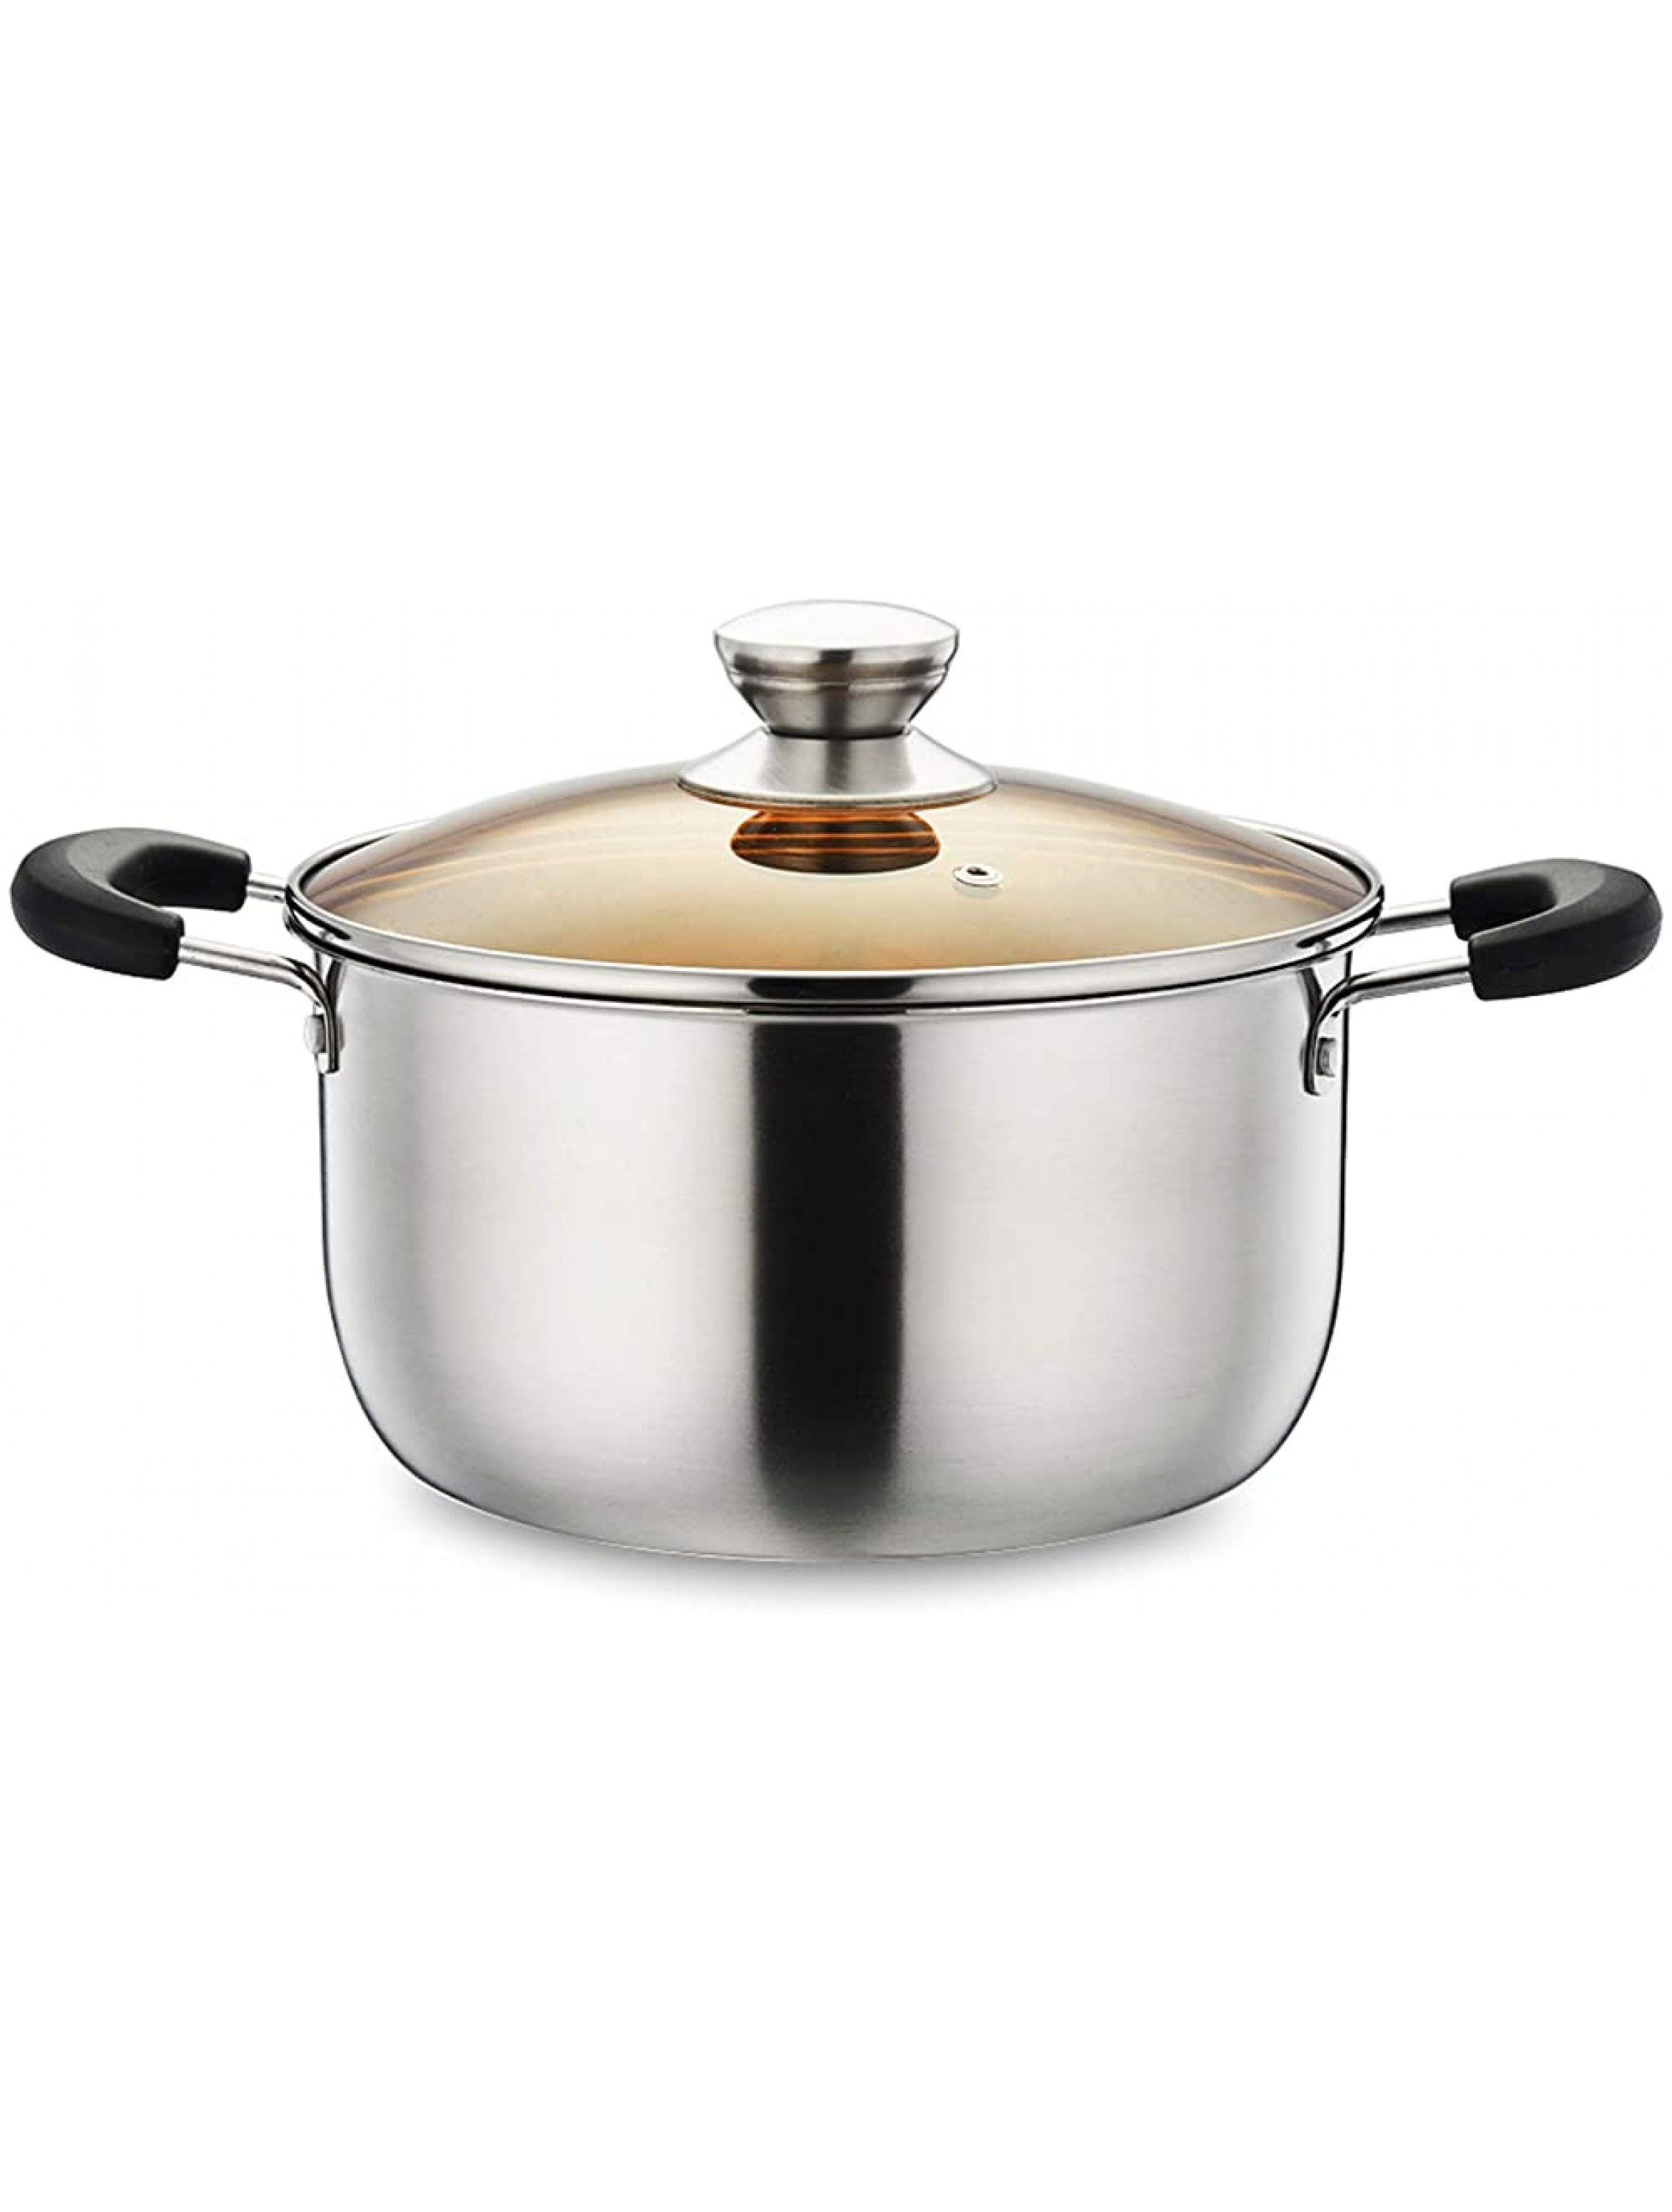 Stainless Steel Stockpot P&P CHEF 4 Quart Stock Pot with Lid Heat-Proof Double Handles Dishwasher Safe - BXDZ6H5UJ